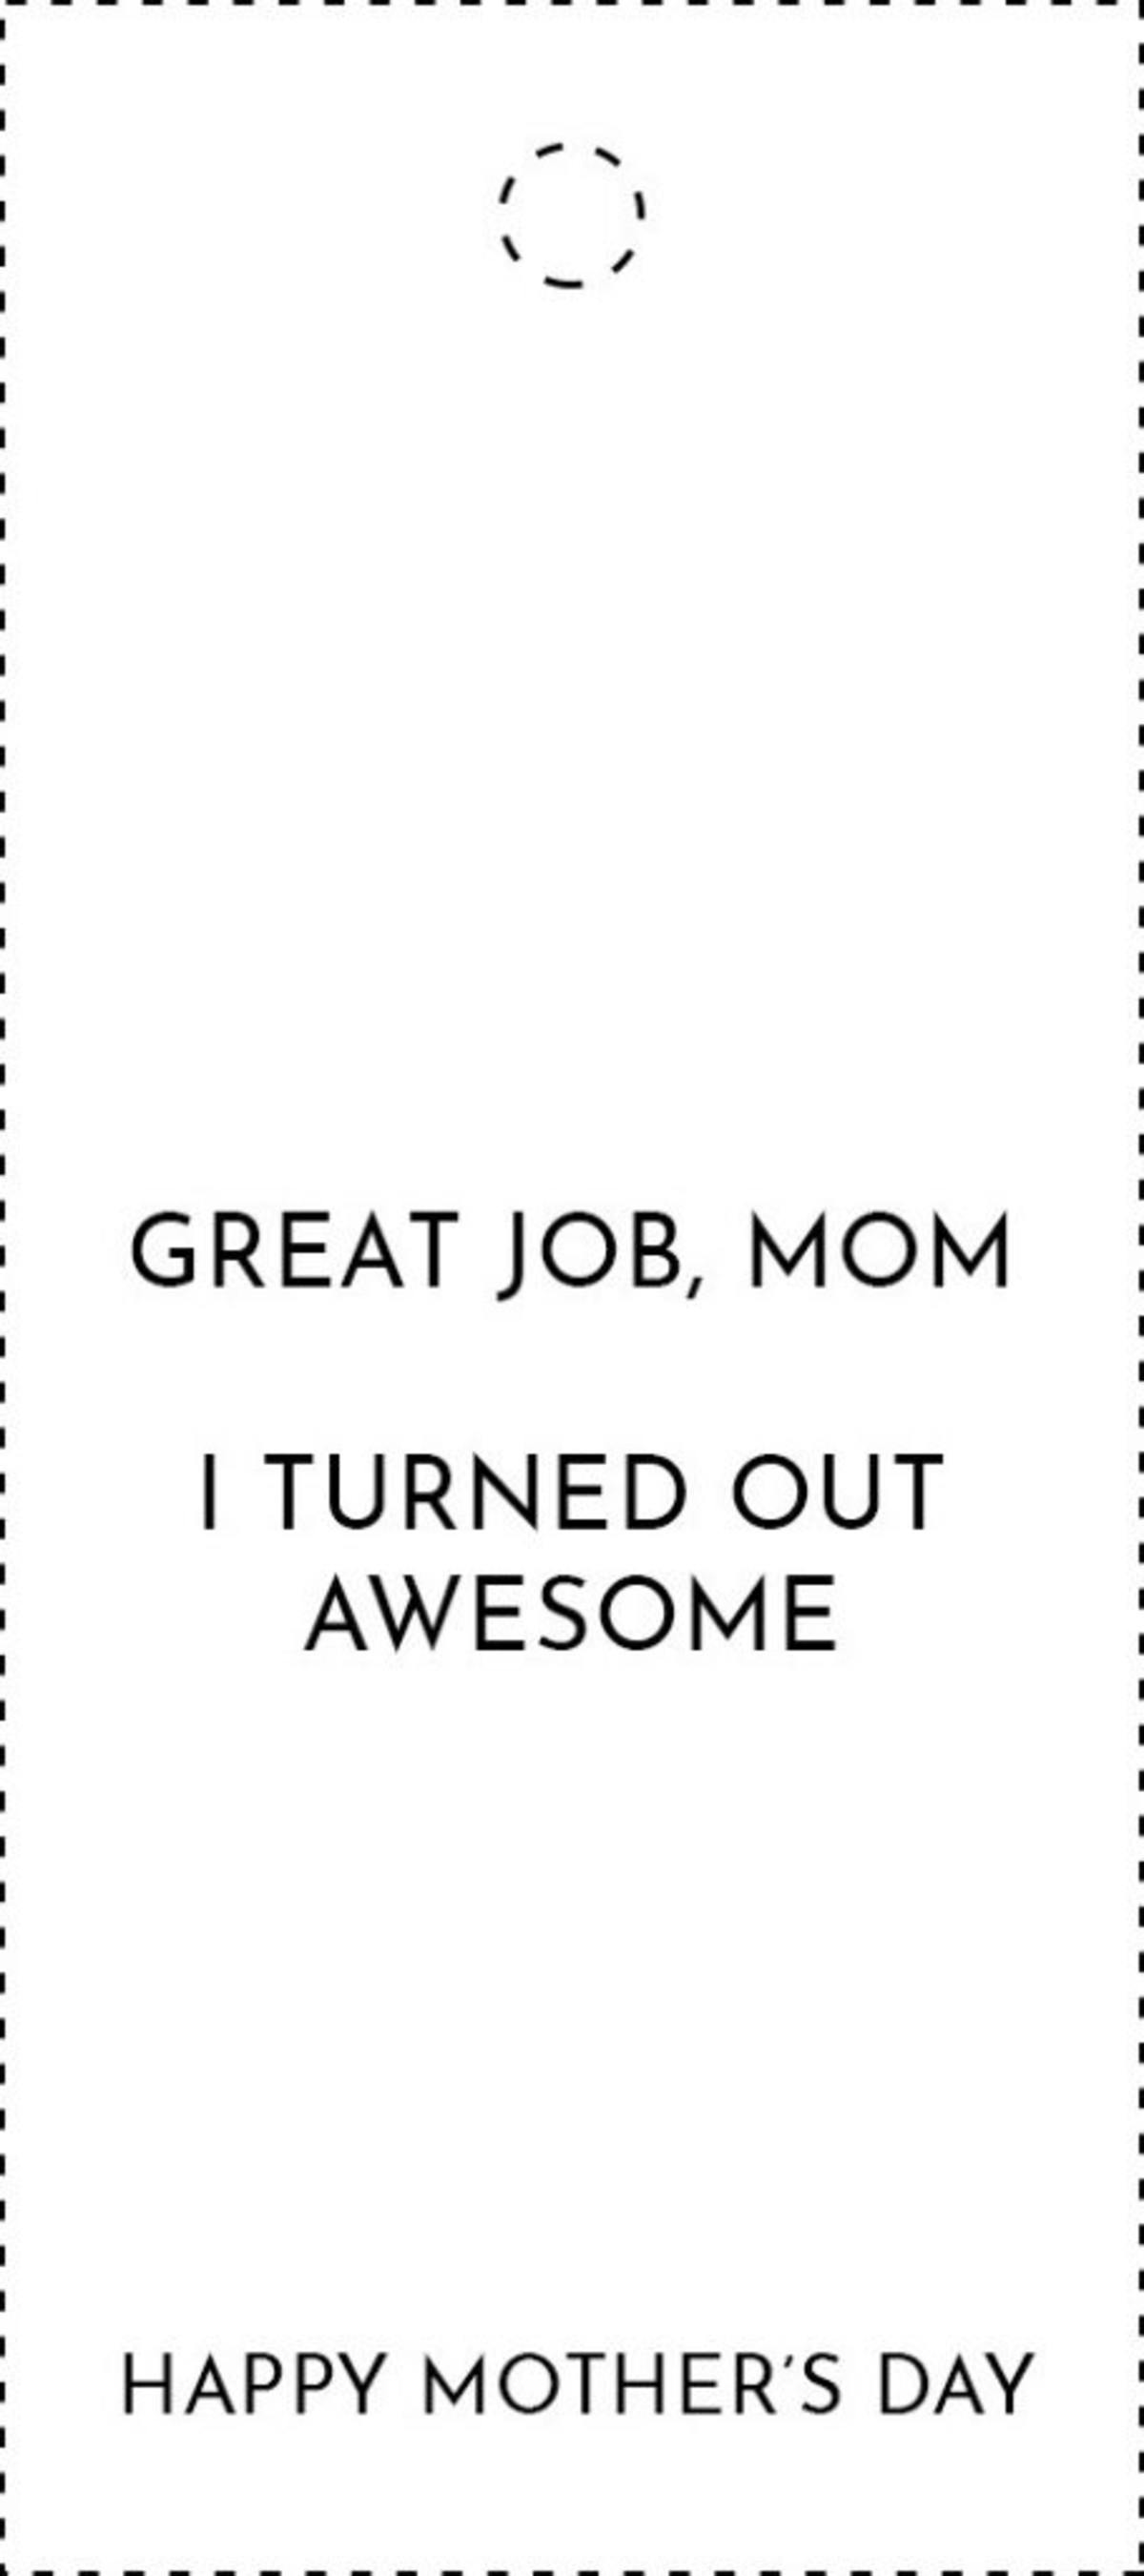  Mother's Day funny Hang Tag Design